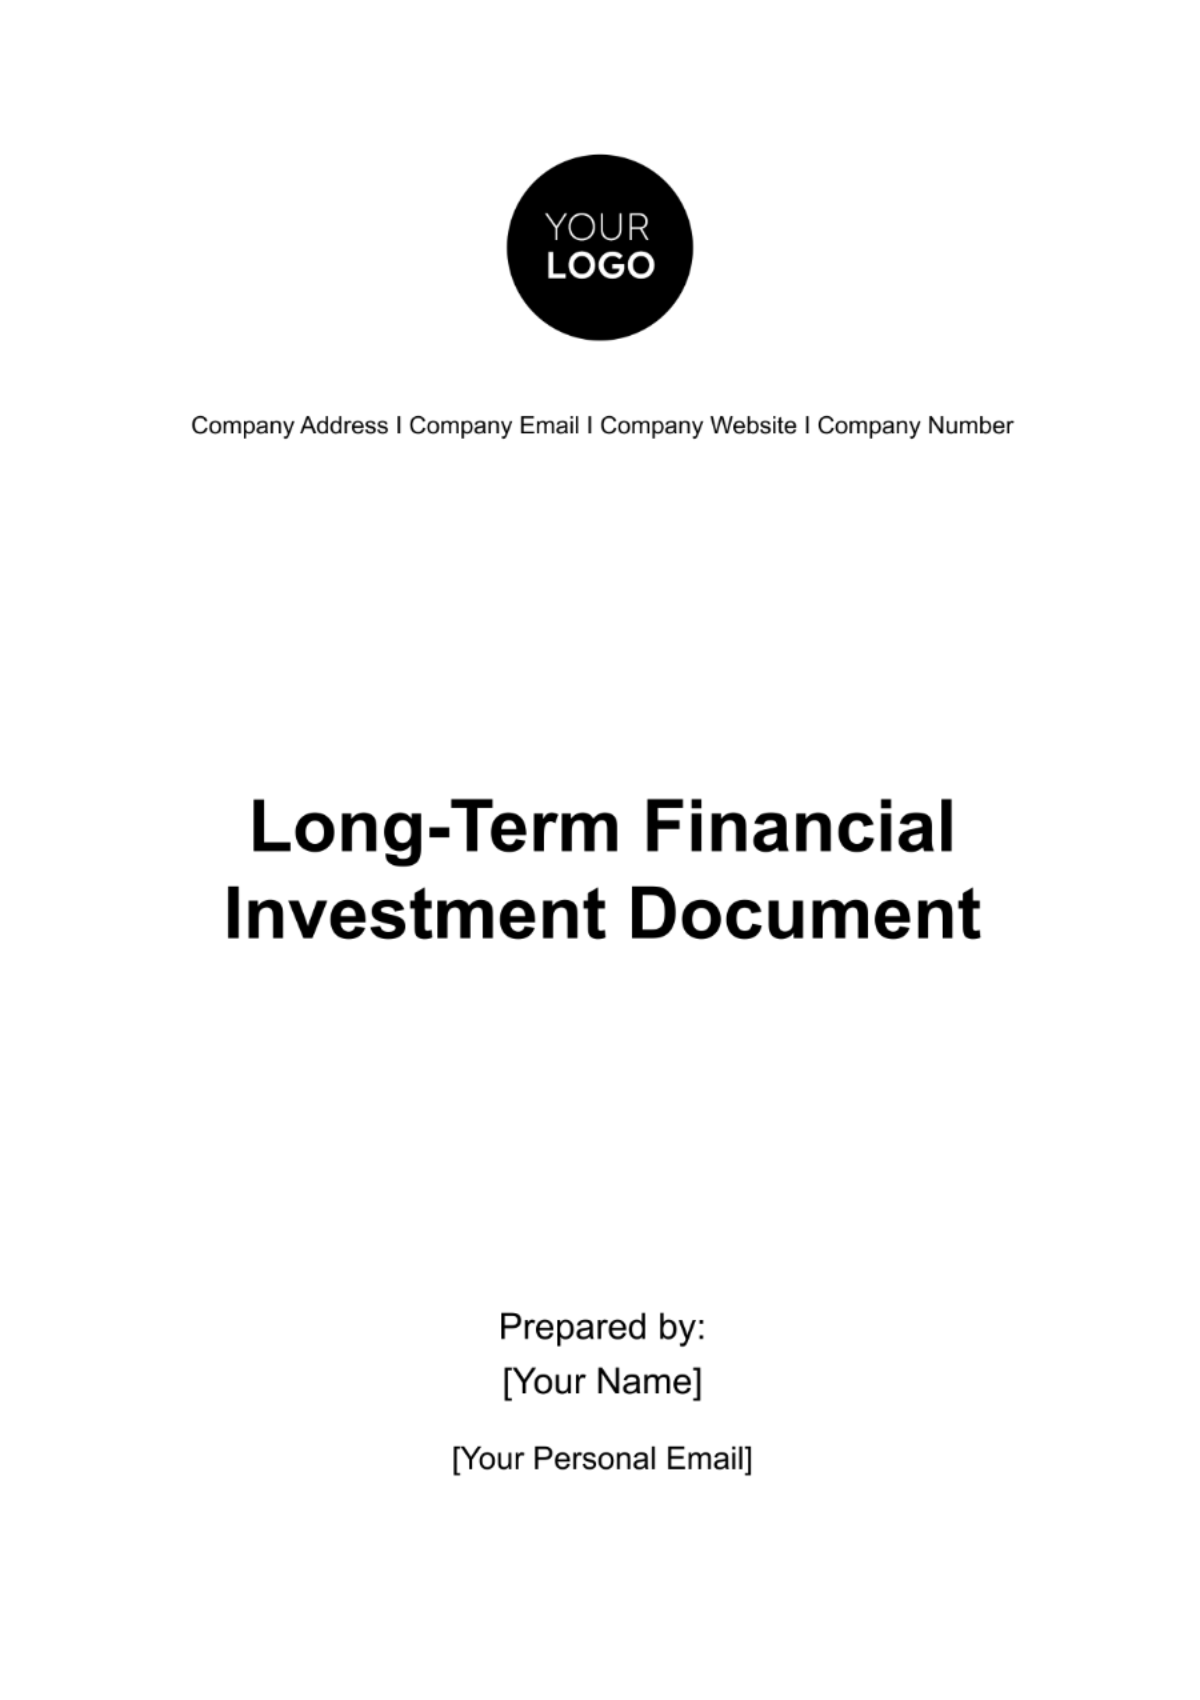 Free Long-Term Financial Investment Document Template